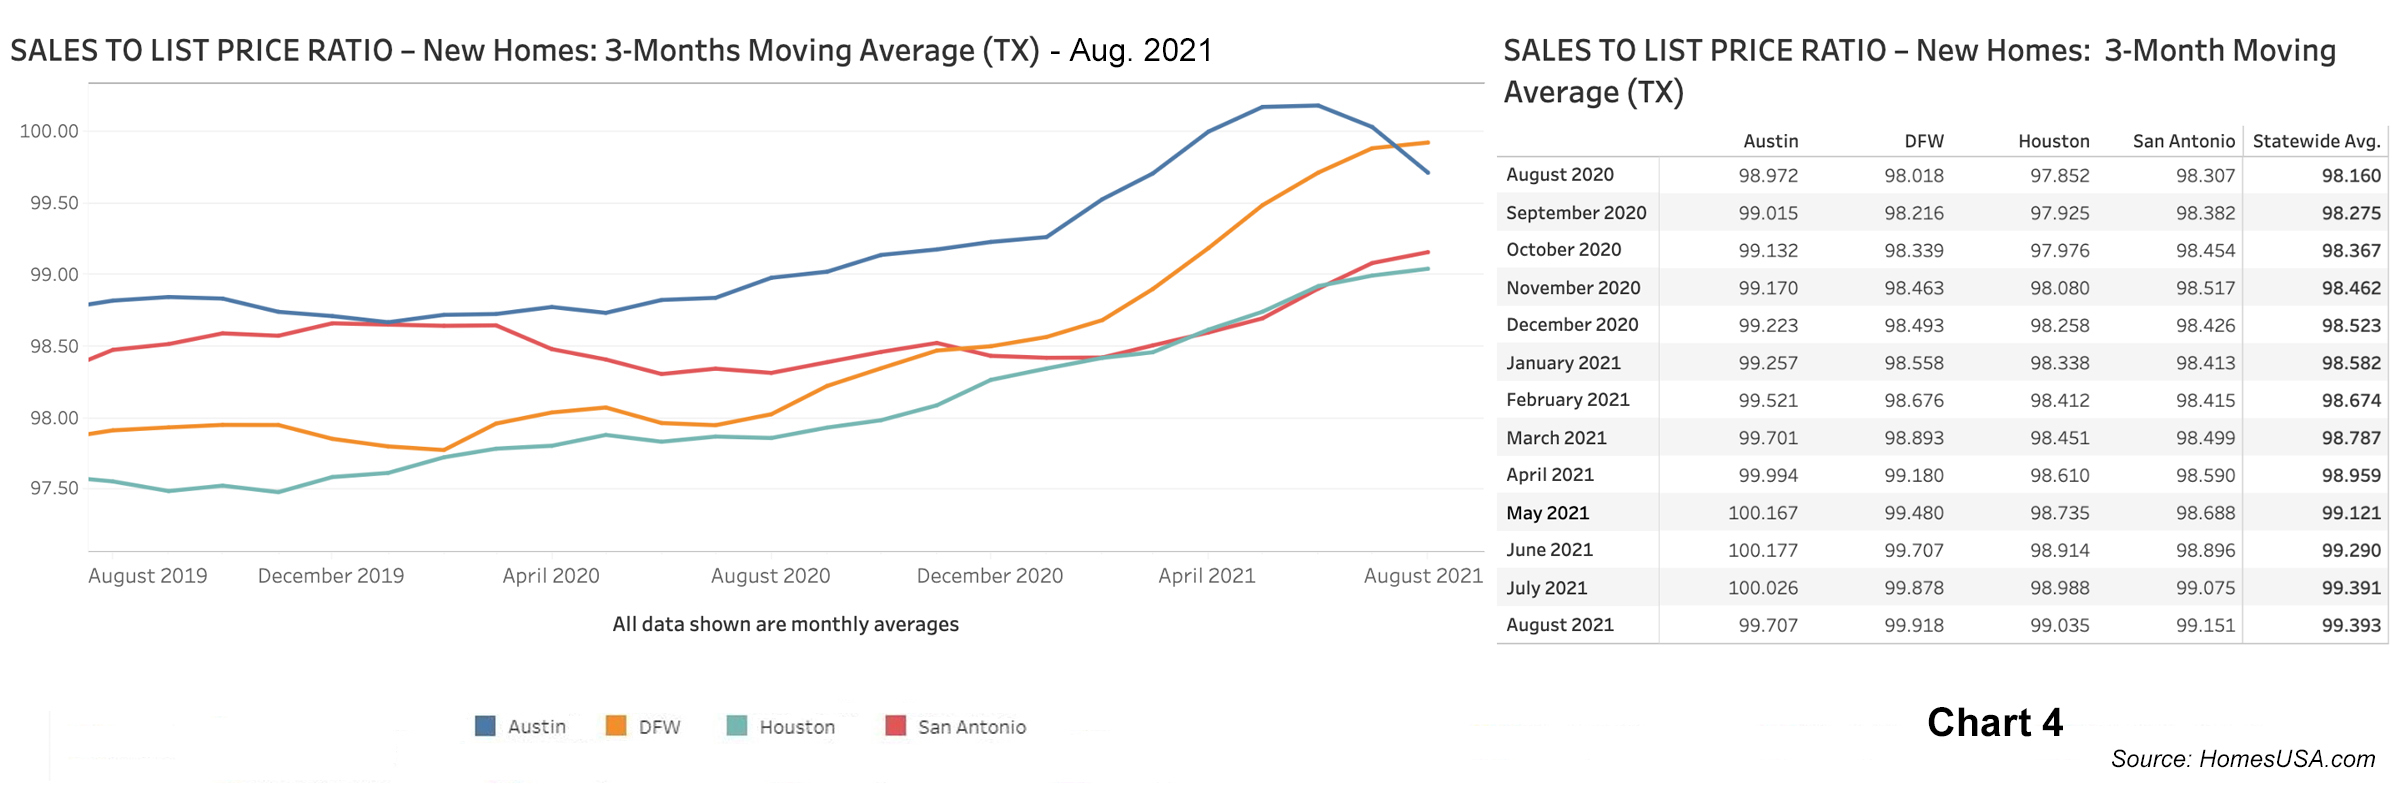 Chart 4: Sales-to-List-Price Ratio Data for Texas New Homes - August 2021